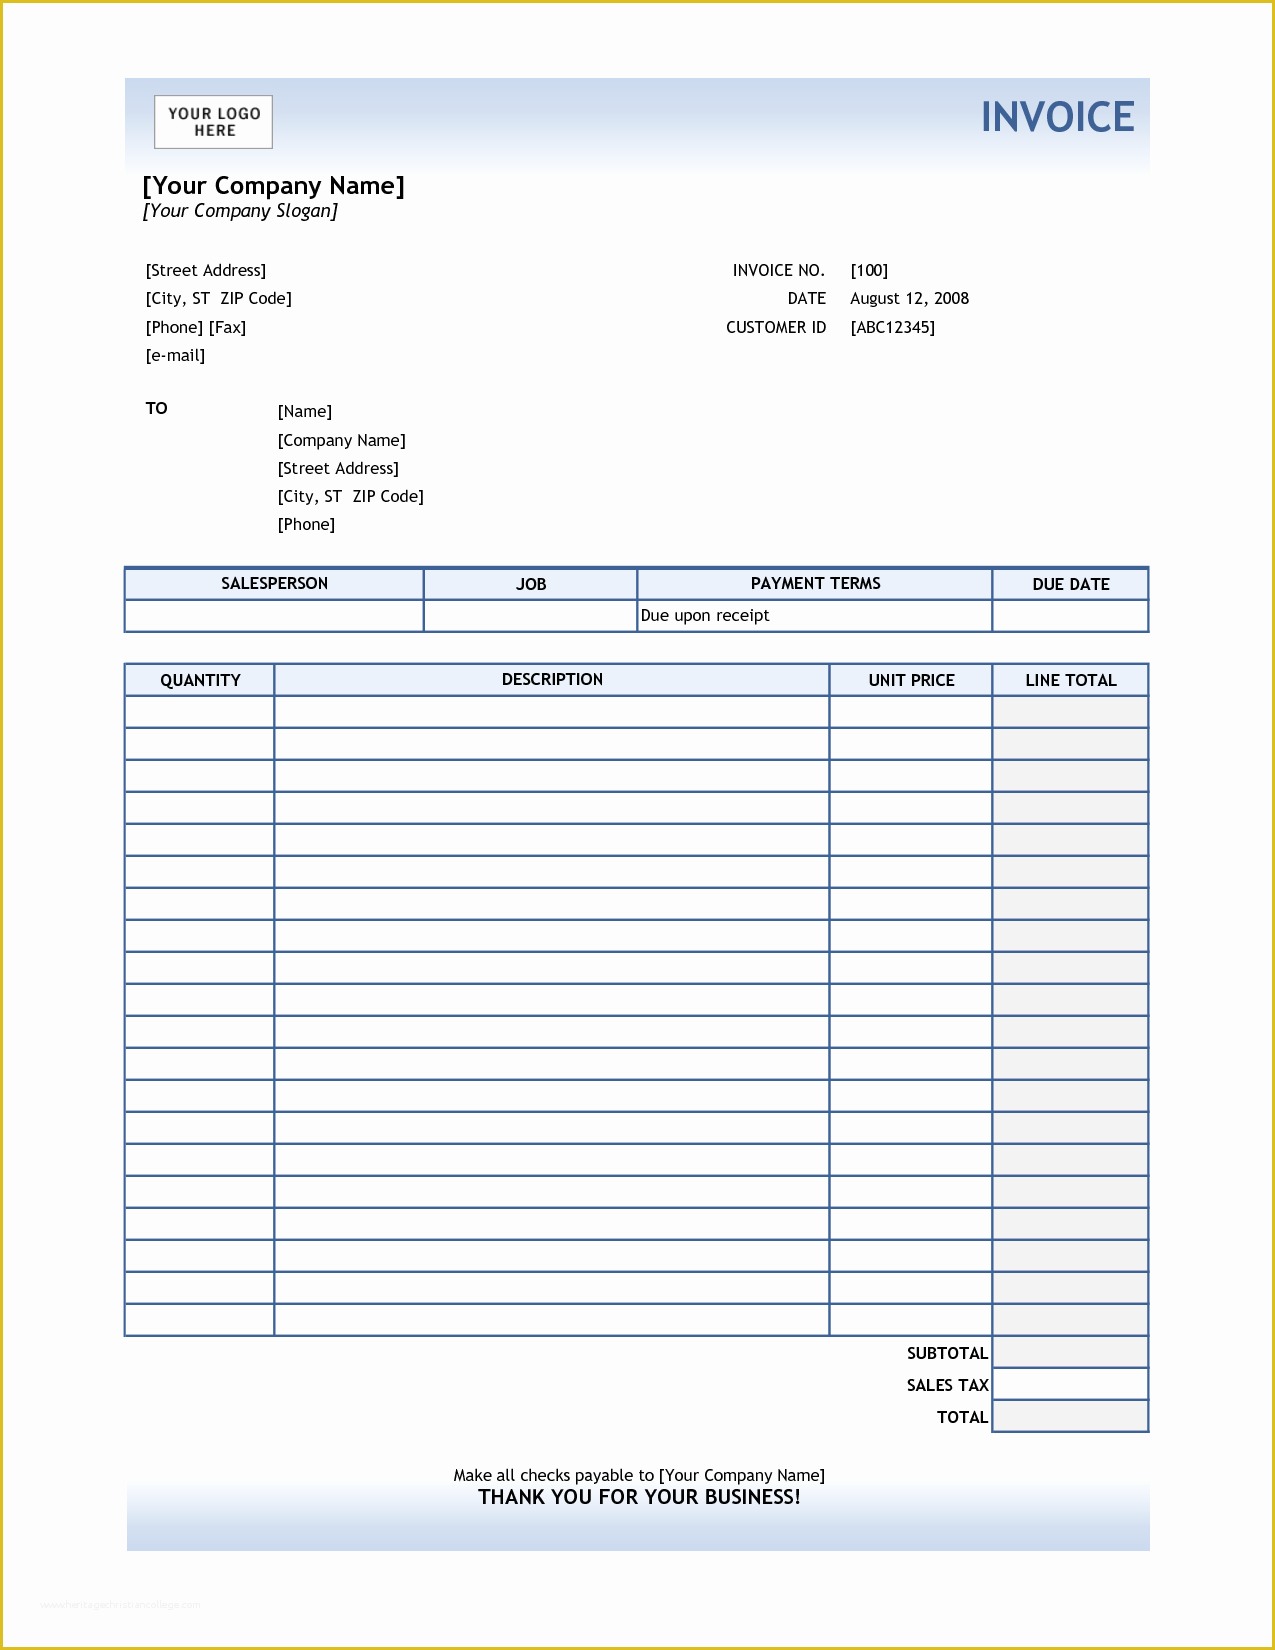 Invoice Template Excel Download Free Of Service Invoice Template Excel